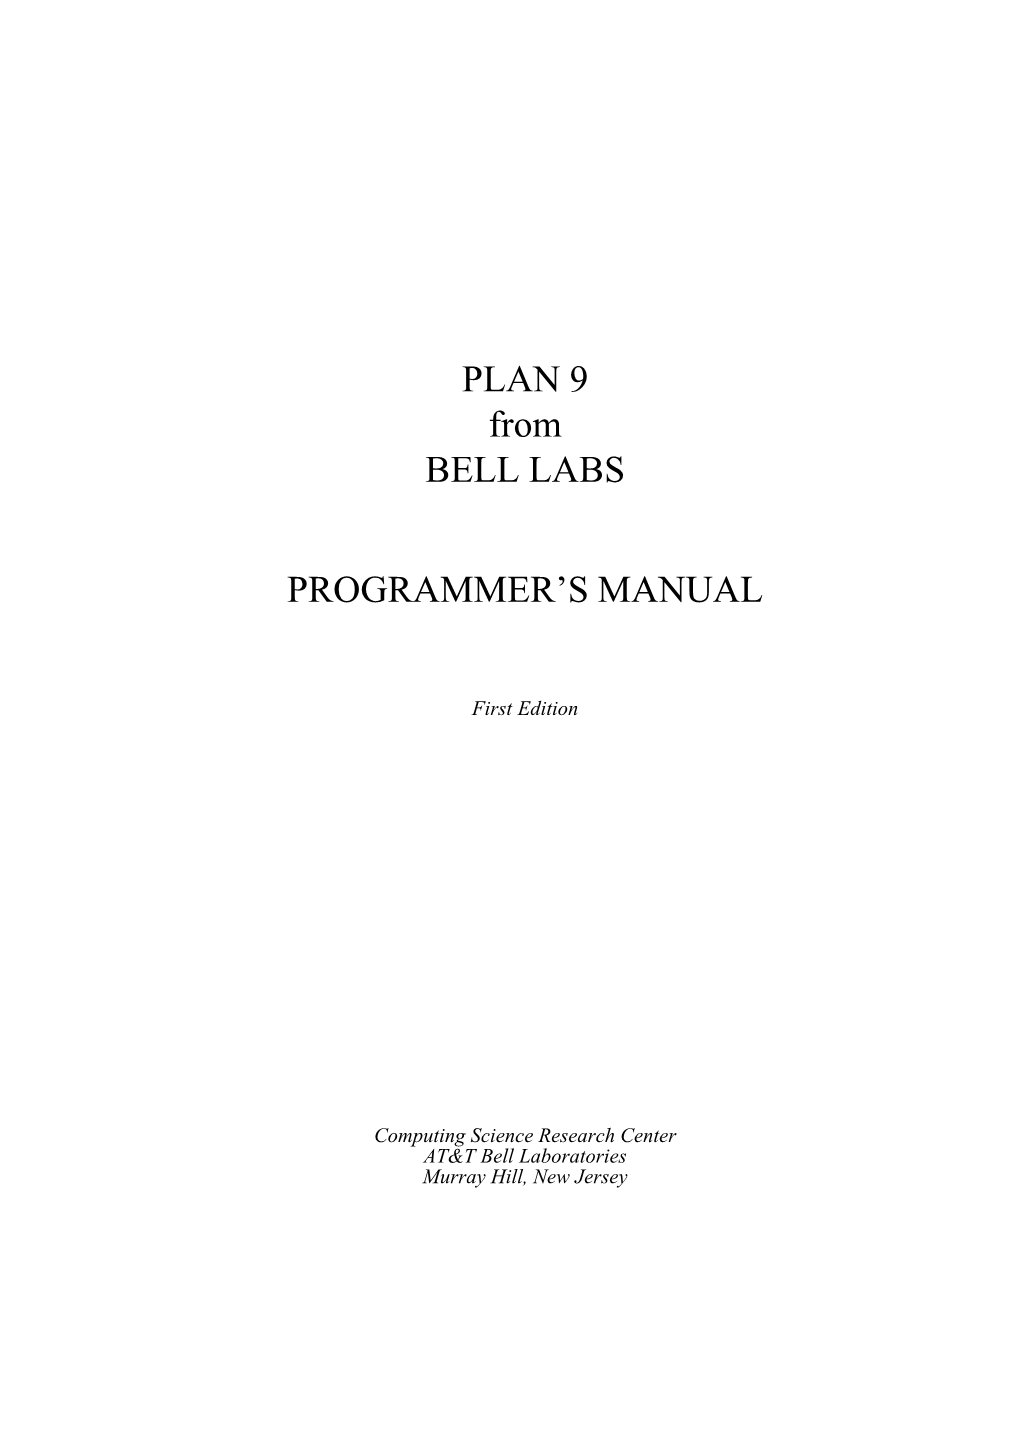 PLAN 9 from BELL LABS PROGRAMMER's MANUAL